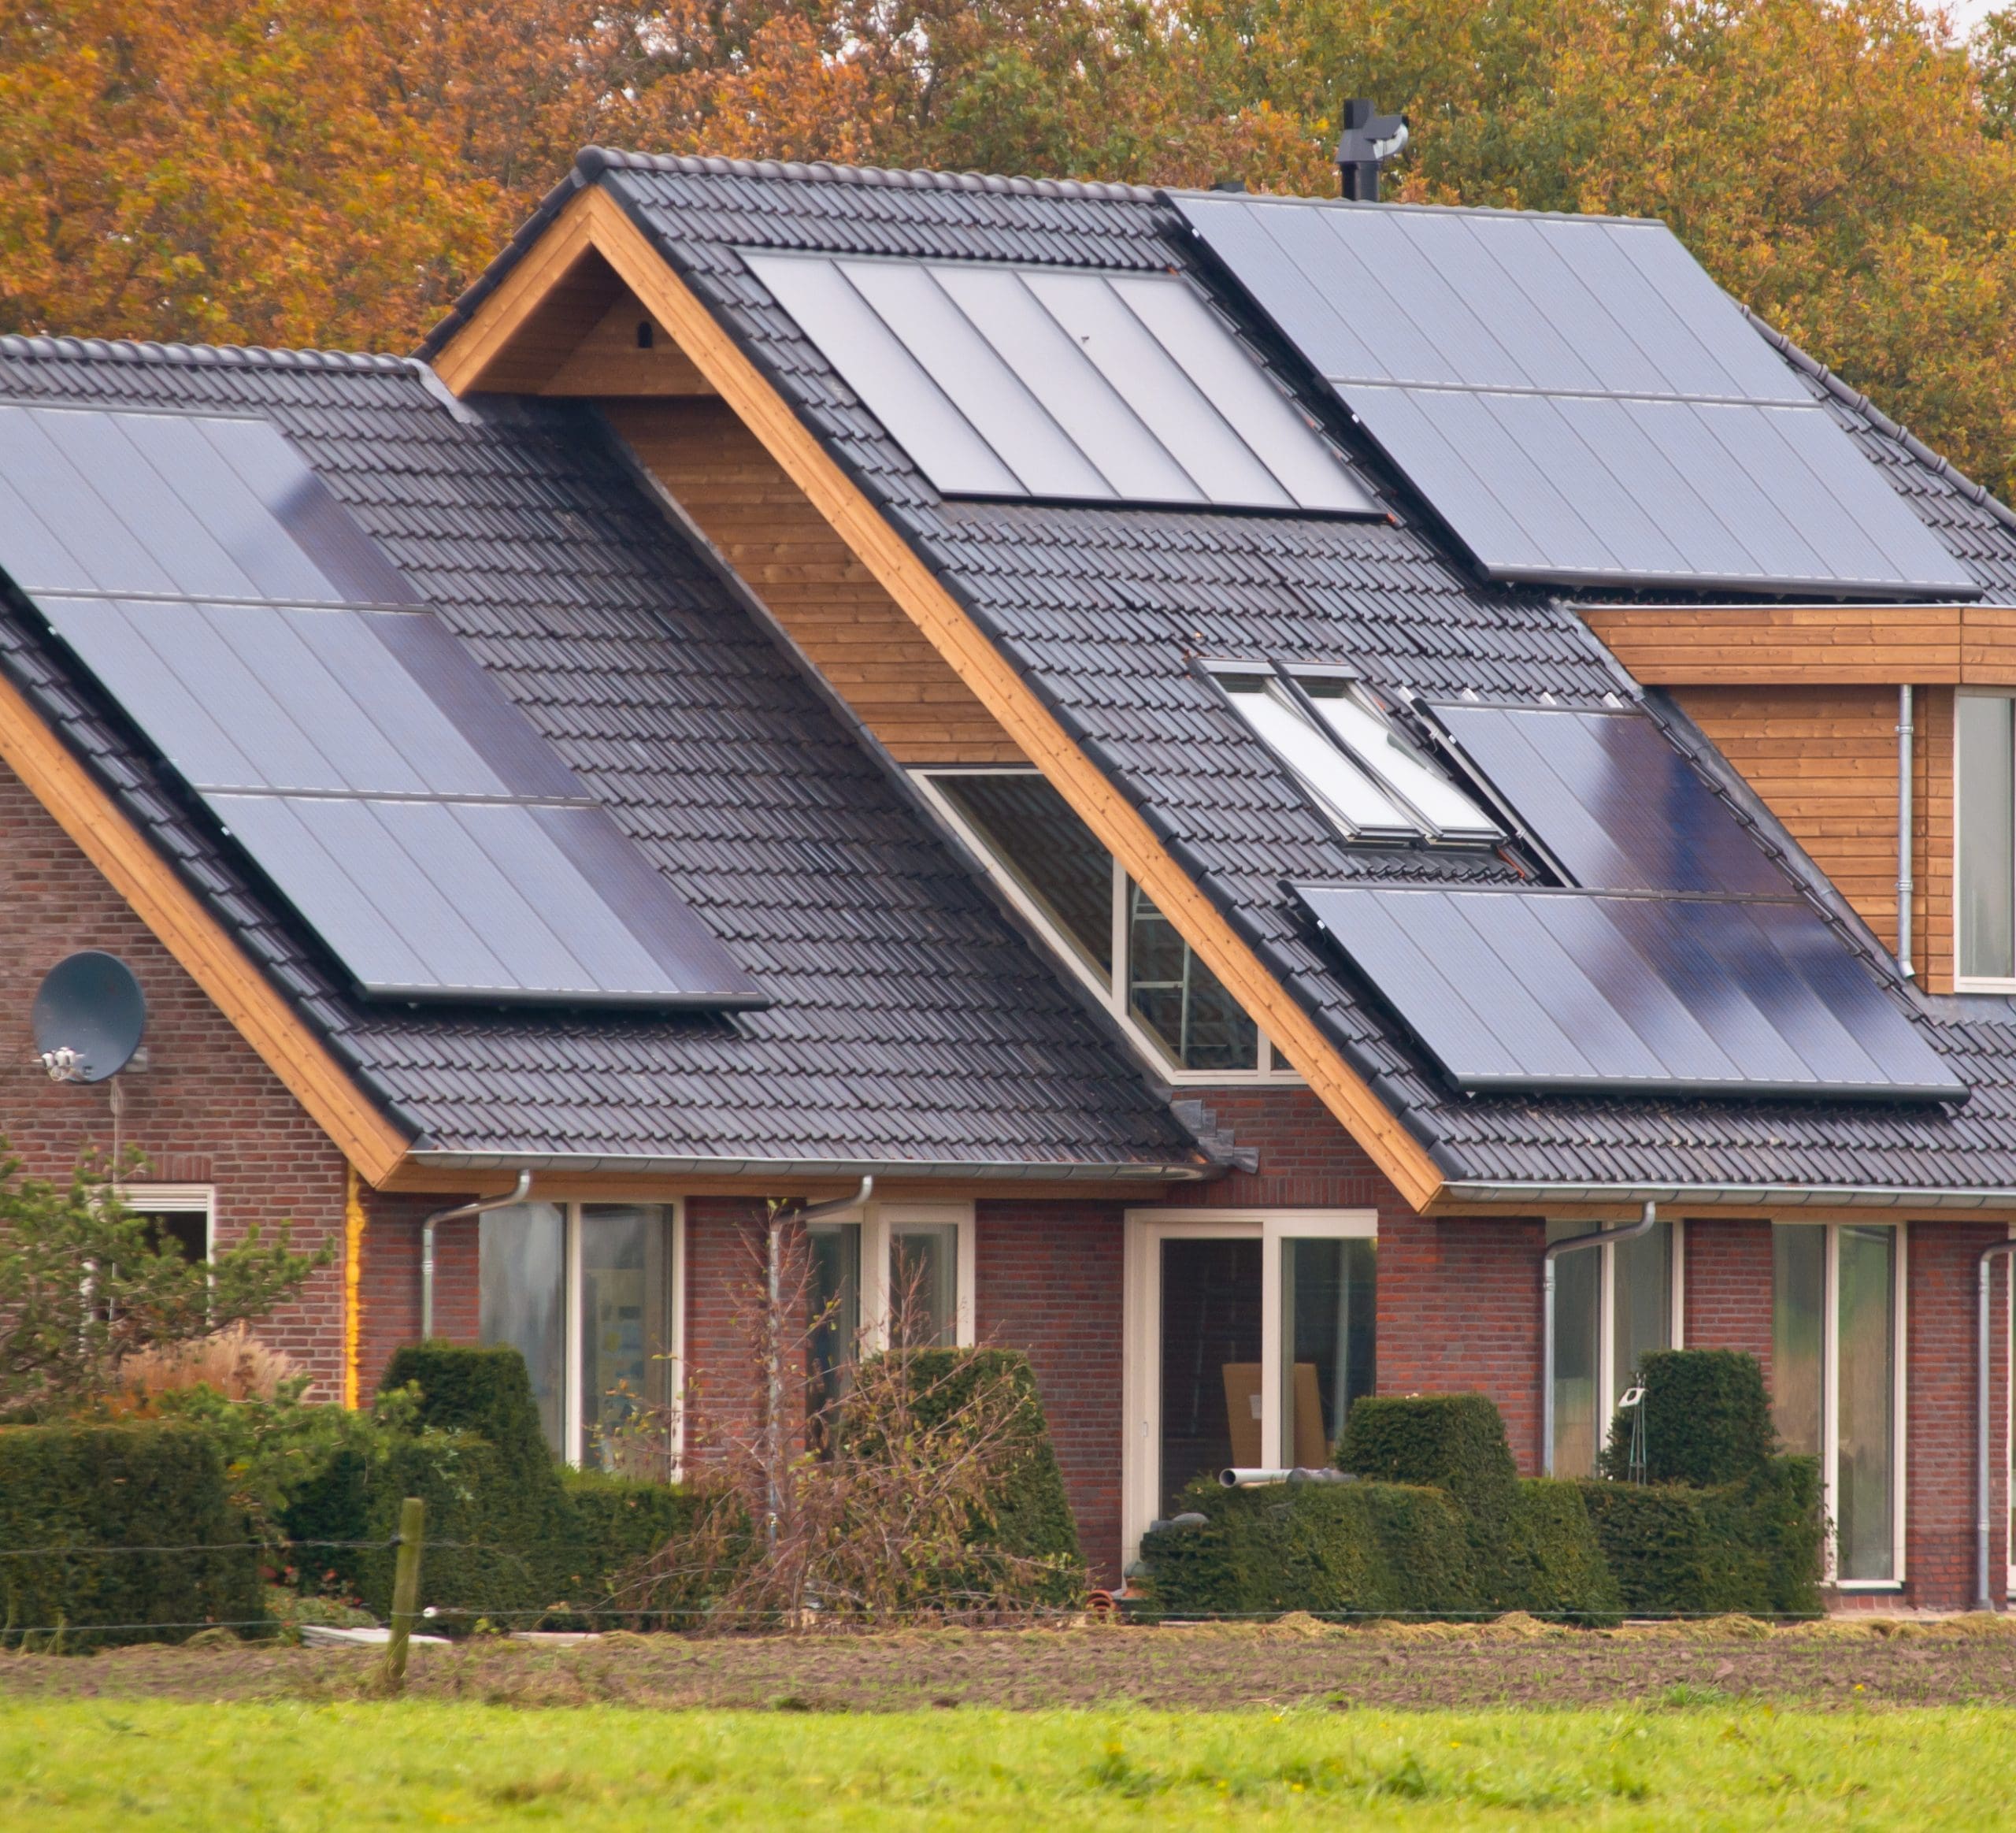 The Benefits of Solar Panels: What Homeowners Need to Know